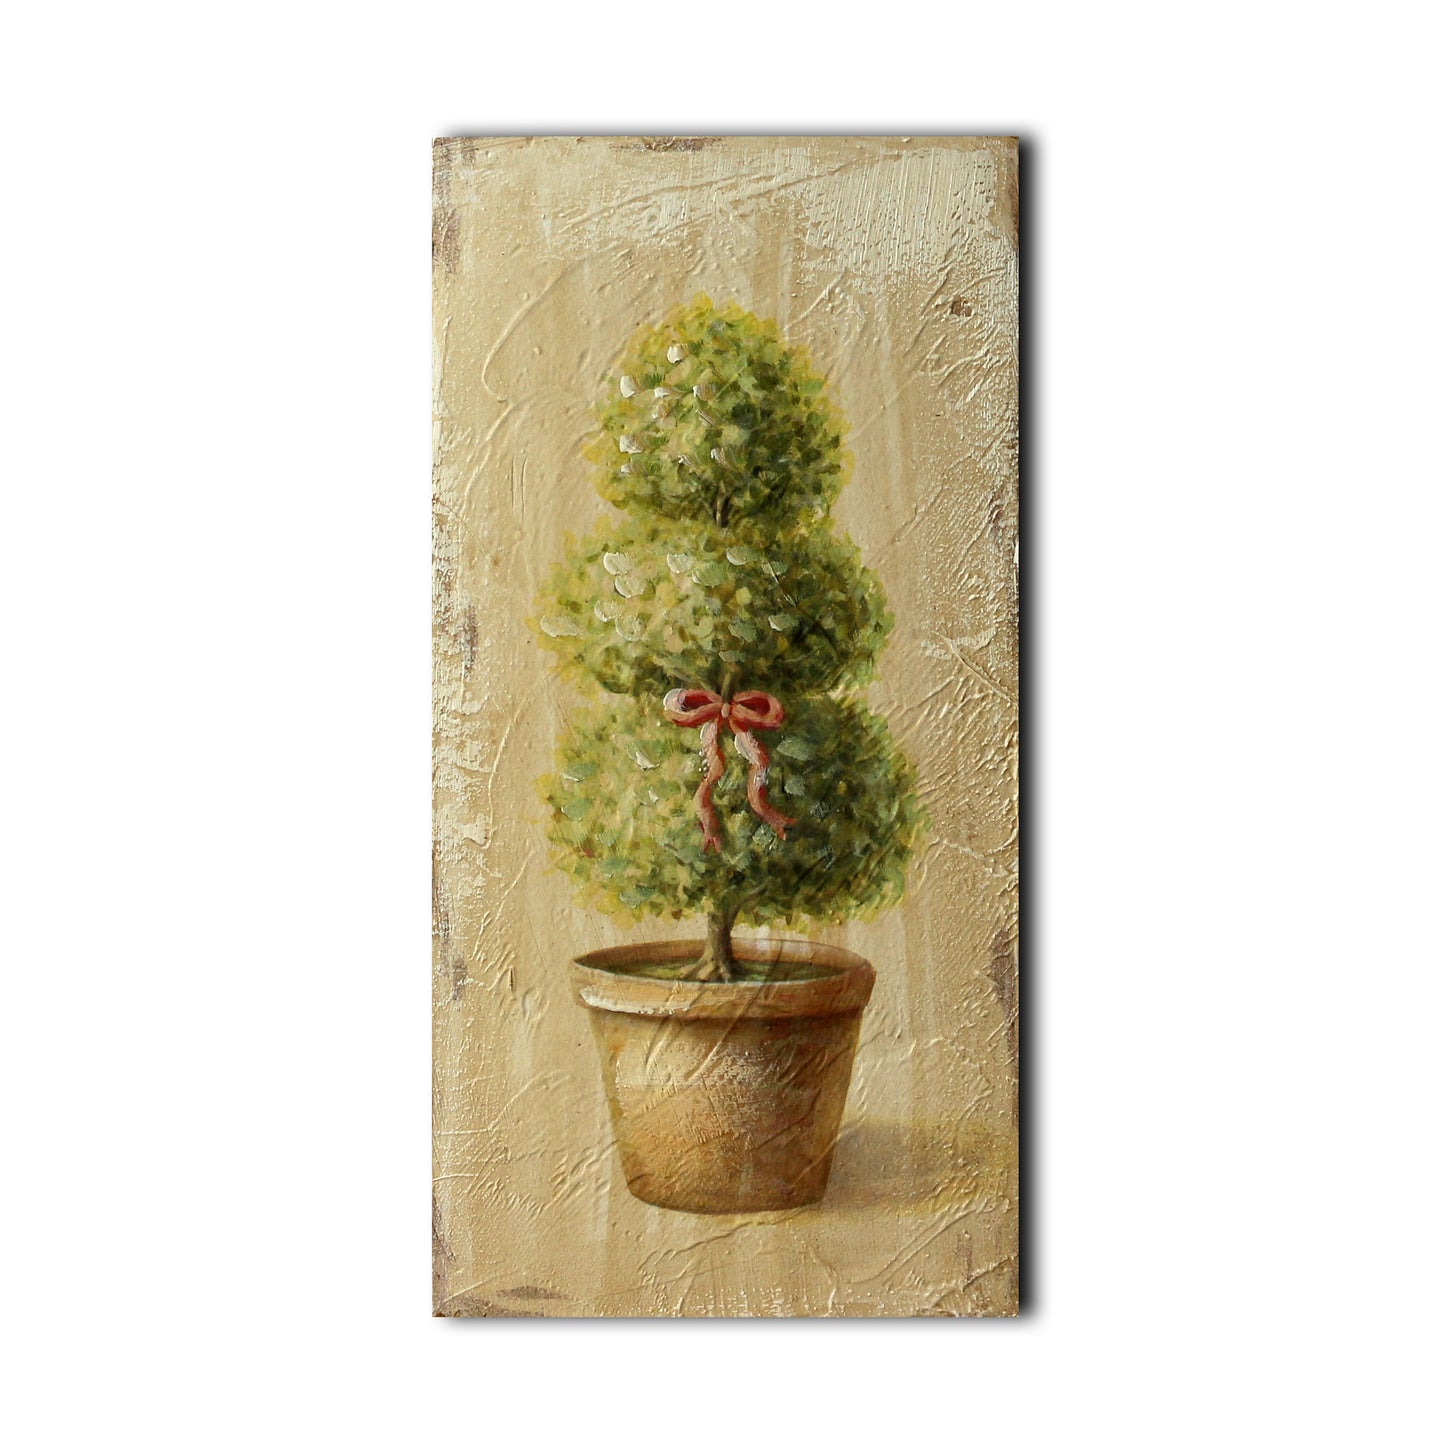 CVHOMEDECO. Primitive Vintage Hand Painted Wooden Frame Wall Hanging 3D Painting Decoration Art, Tree in Terracotta Design, 6 x 12 Inch, Set of 2.